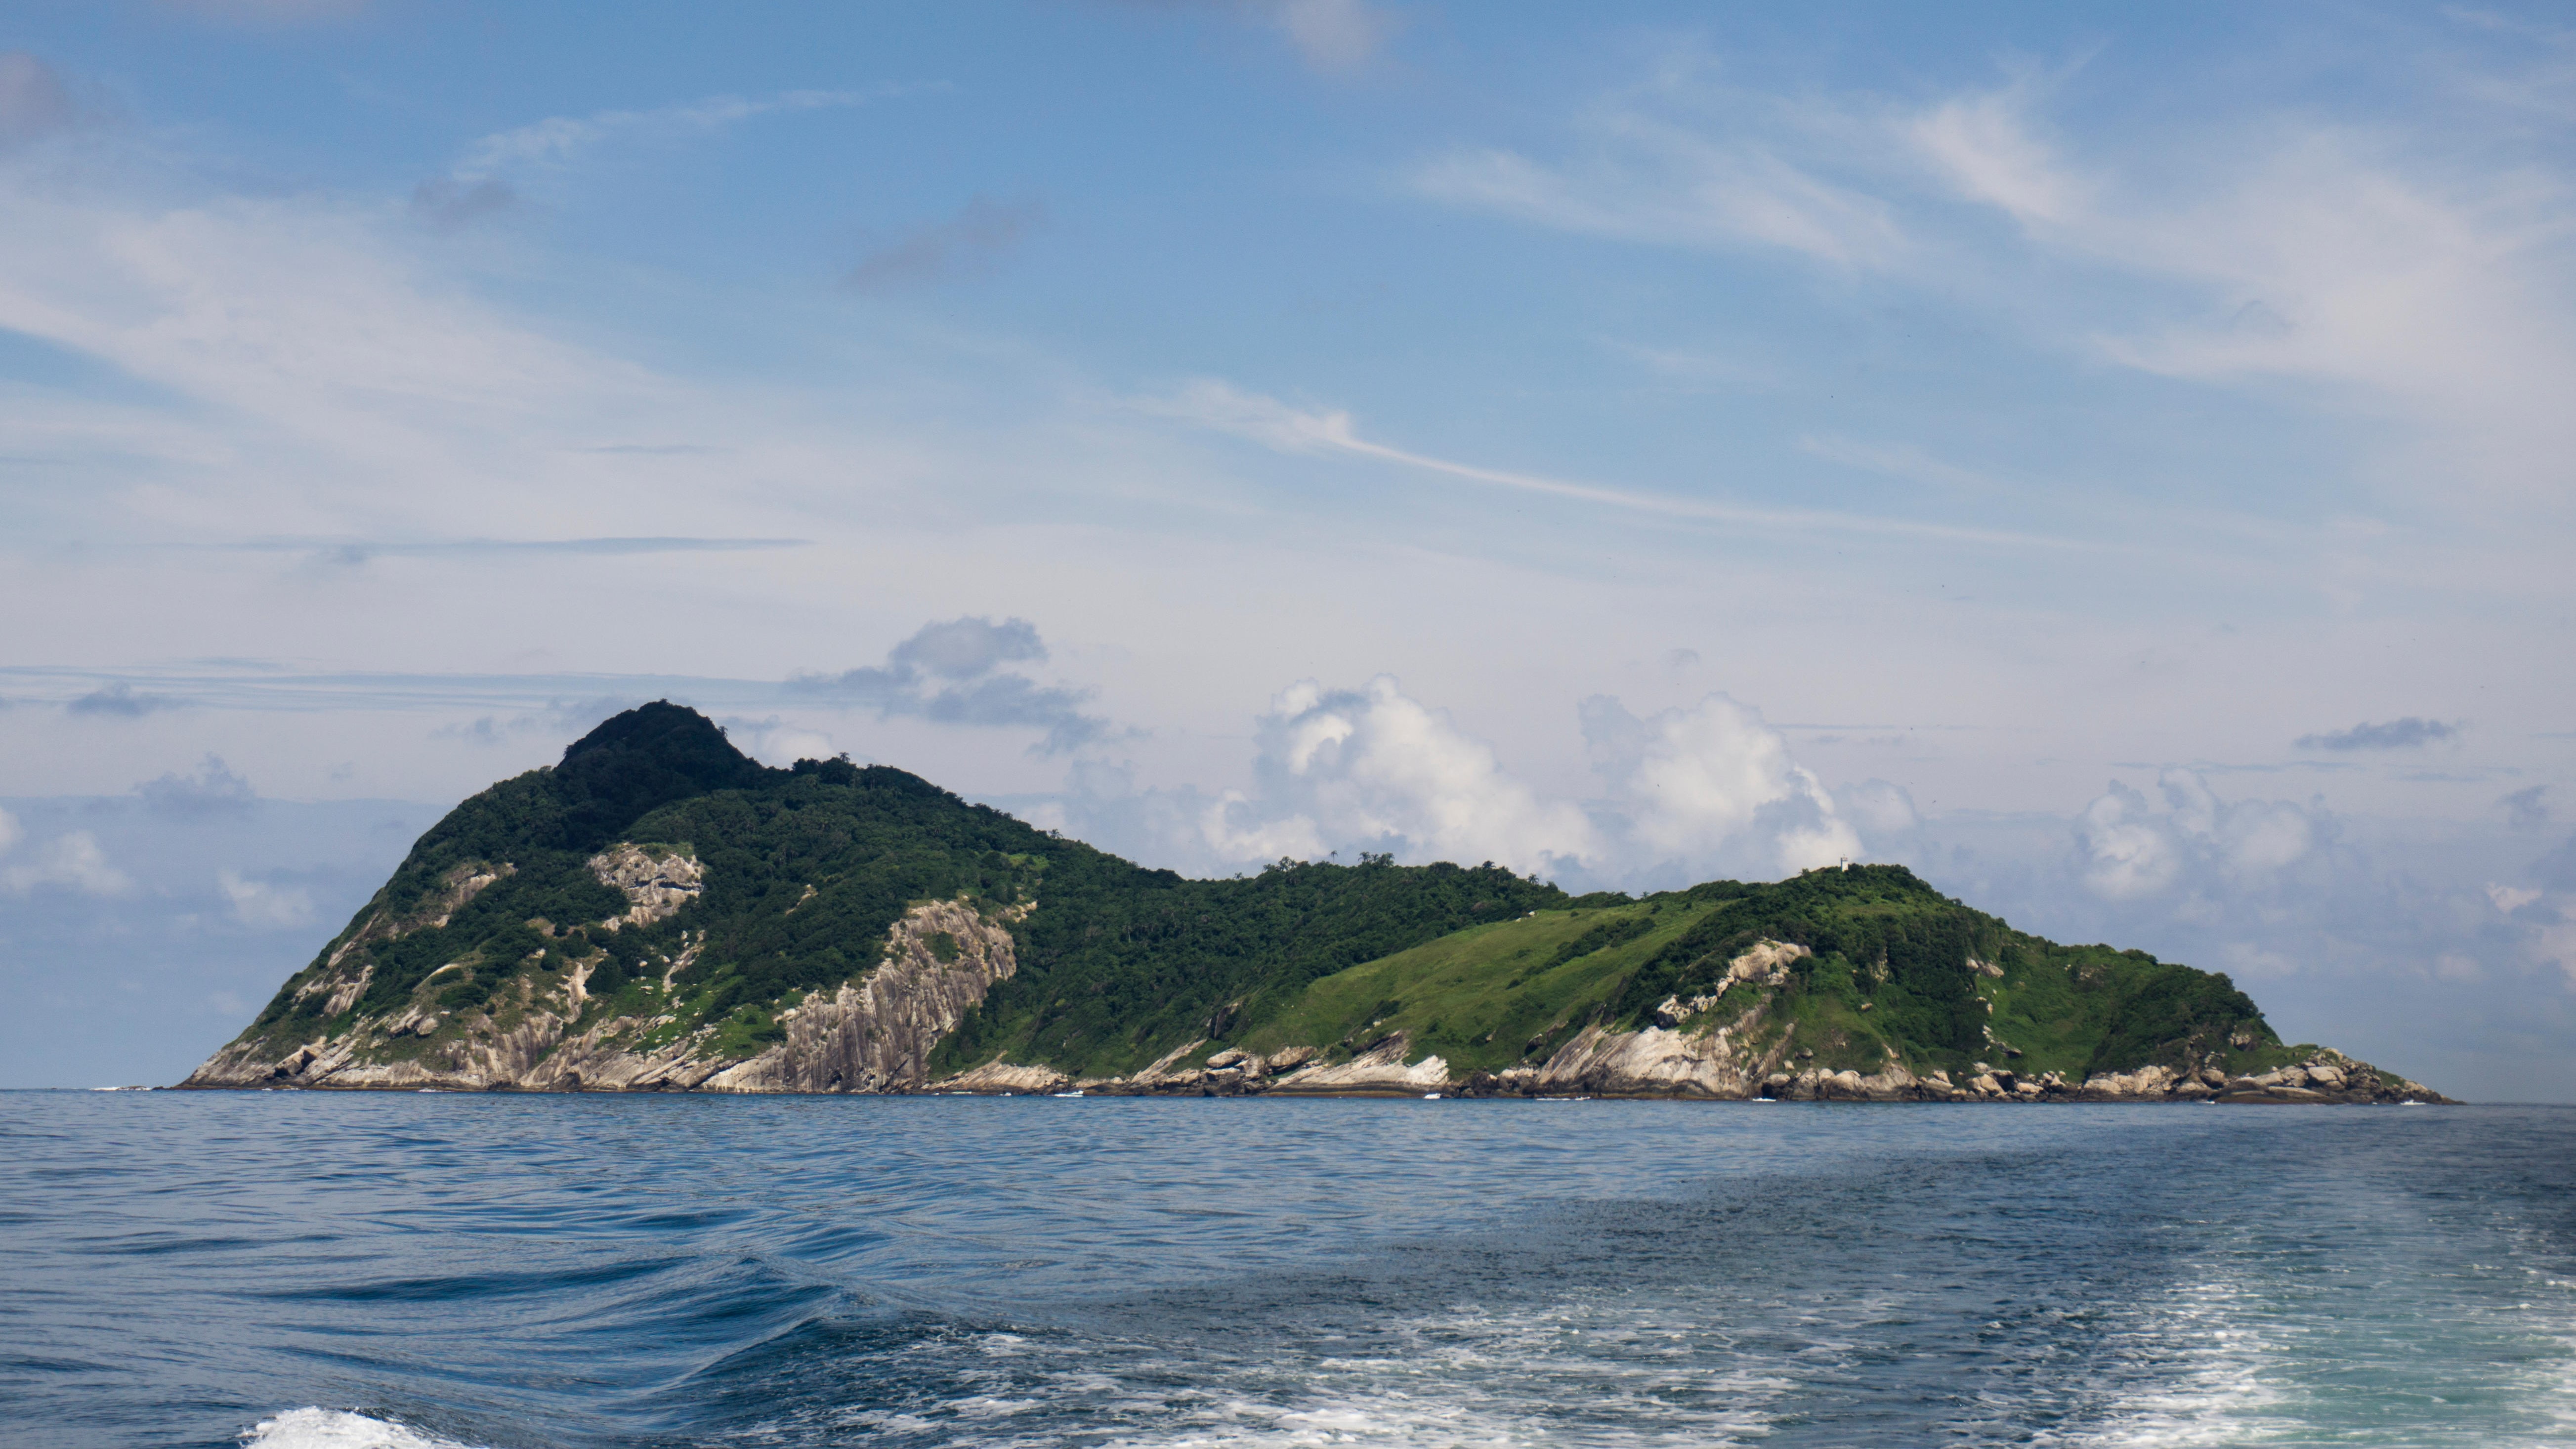 A picture of Snake Island taken from a boat in the Atlantic Ocean. The island has a variable terrain of forest, grassland and barren rocks.